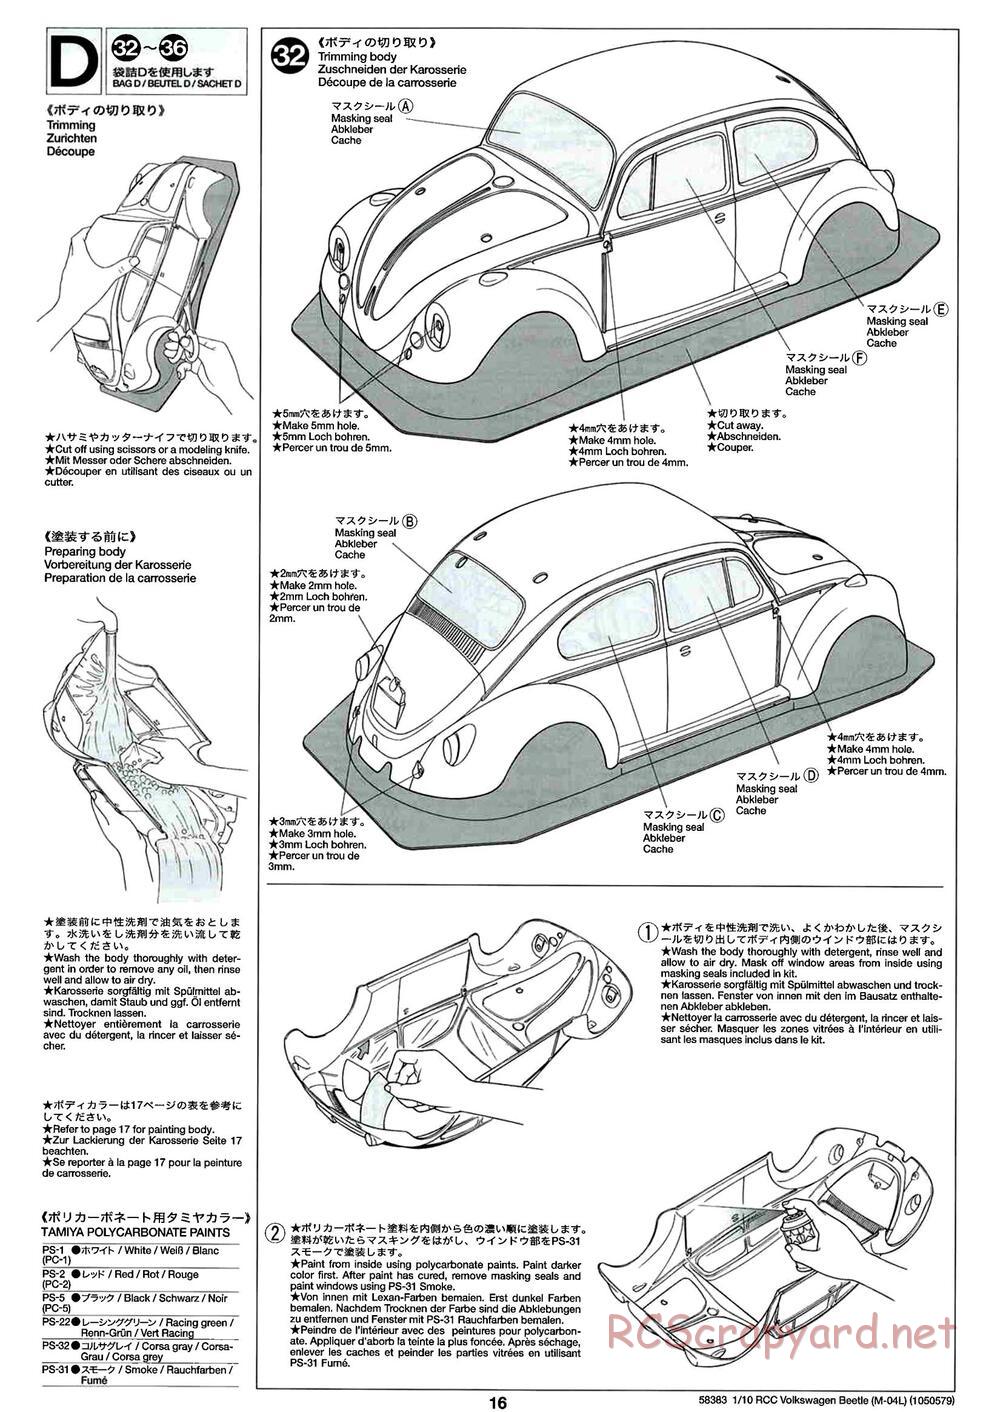 Tamiya - Volkswagen Beetle - M04L Chassis - Manual - Page 16